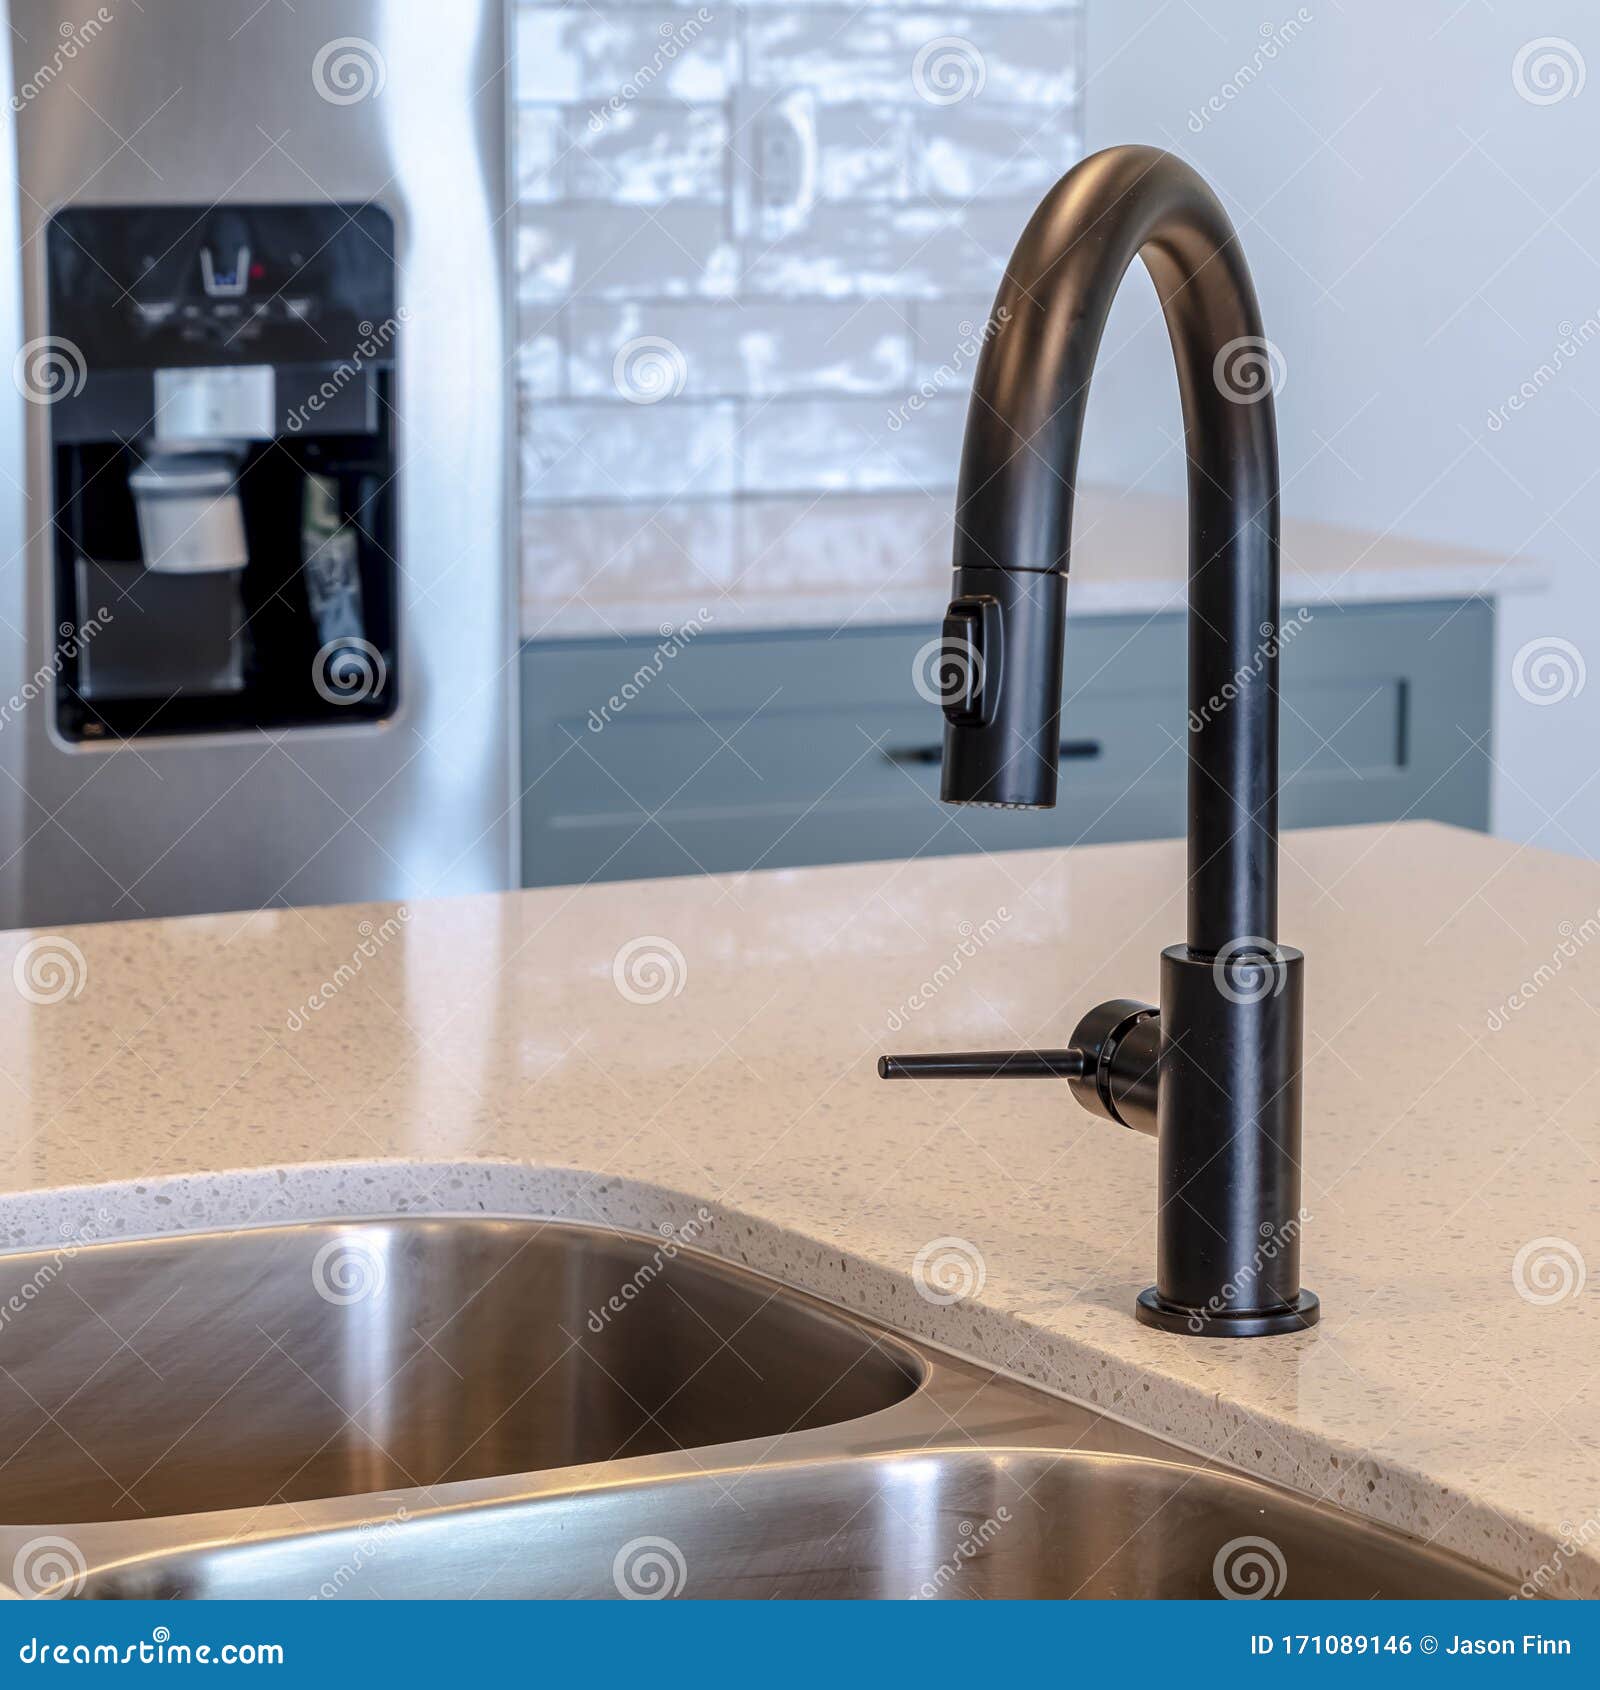 Photo Square Frame Black Faucet And Stainless Steel Double Basin